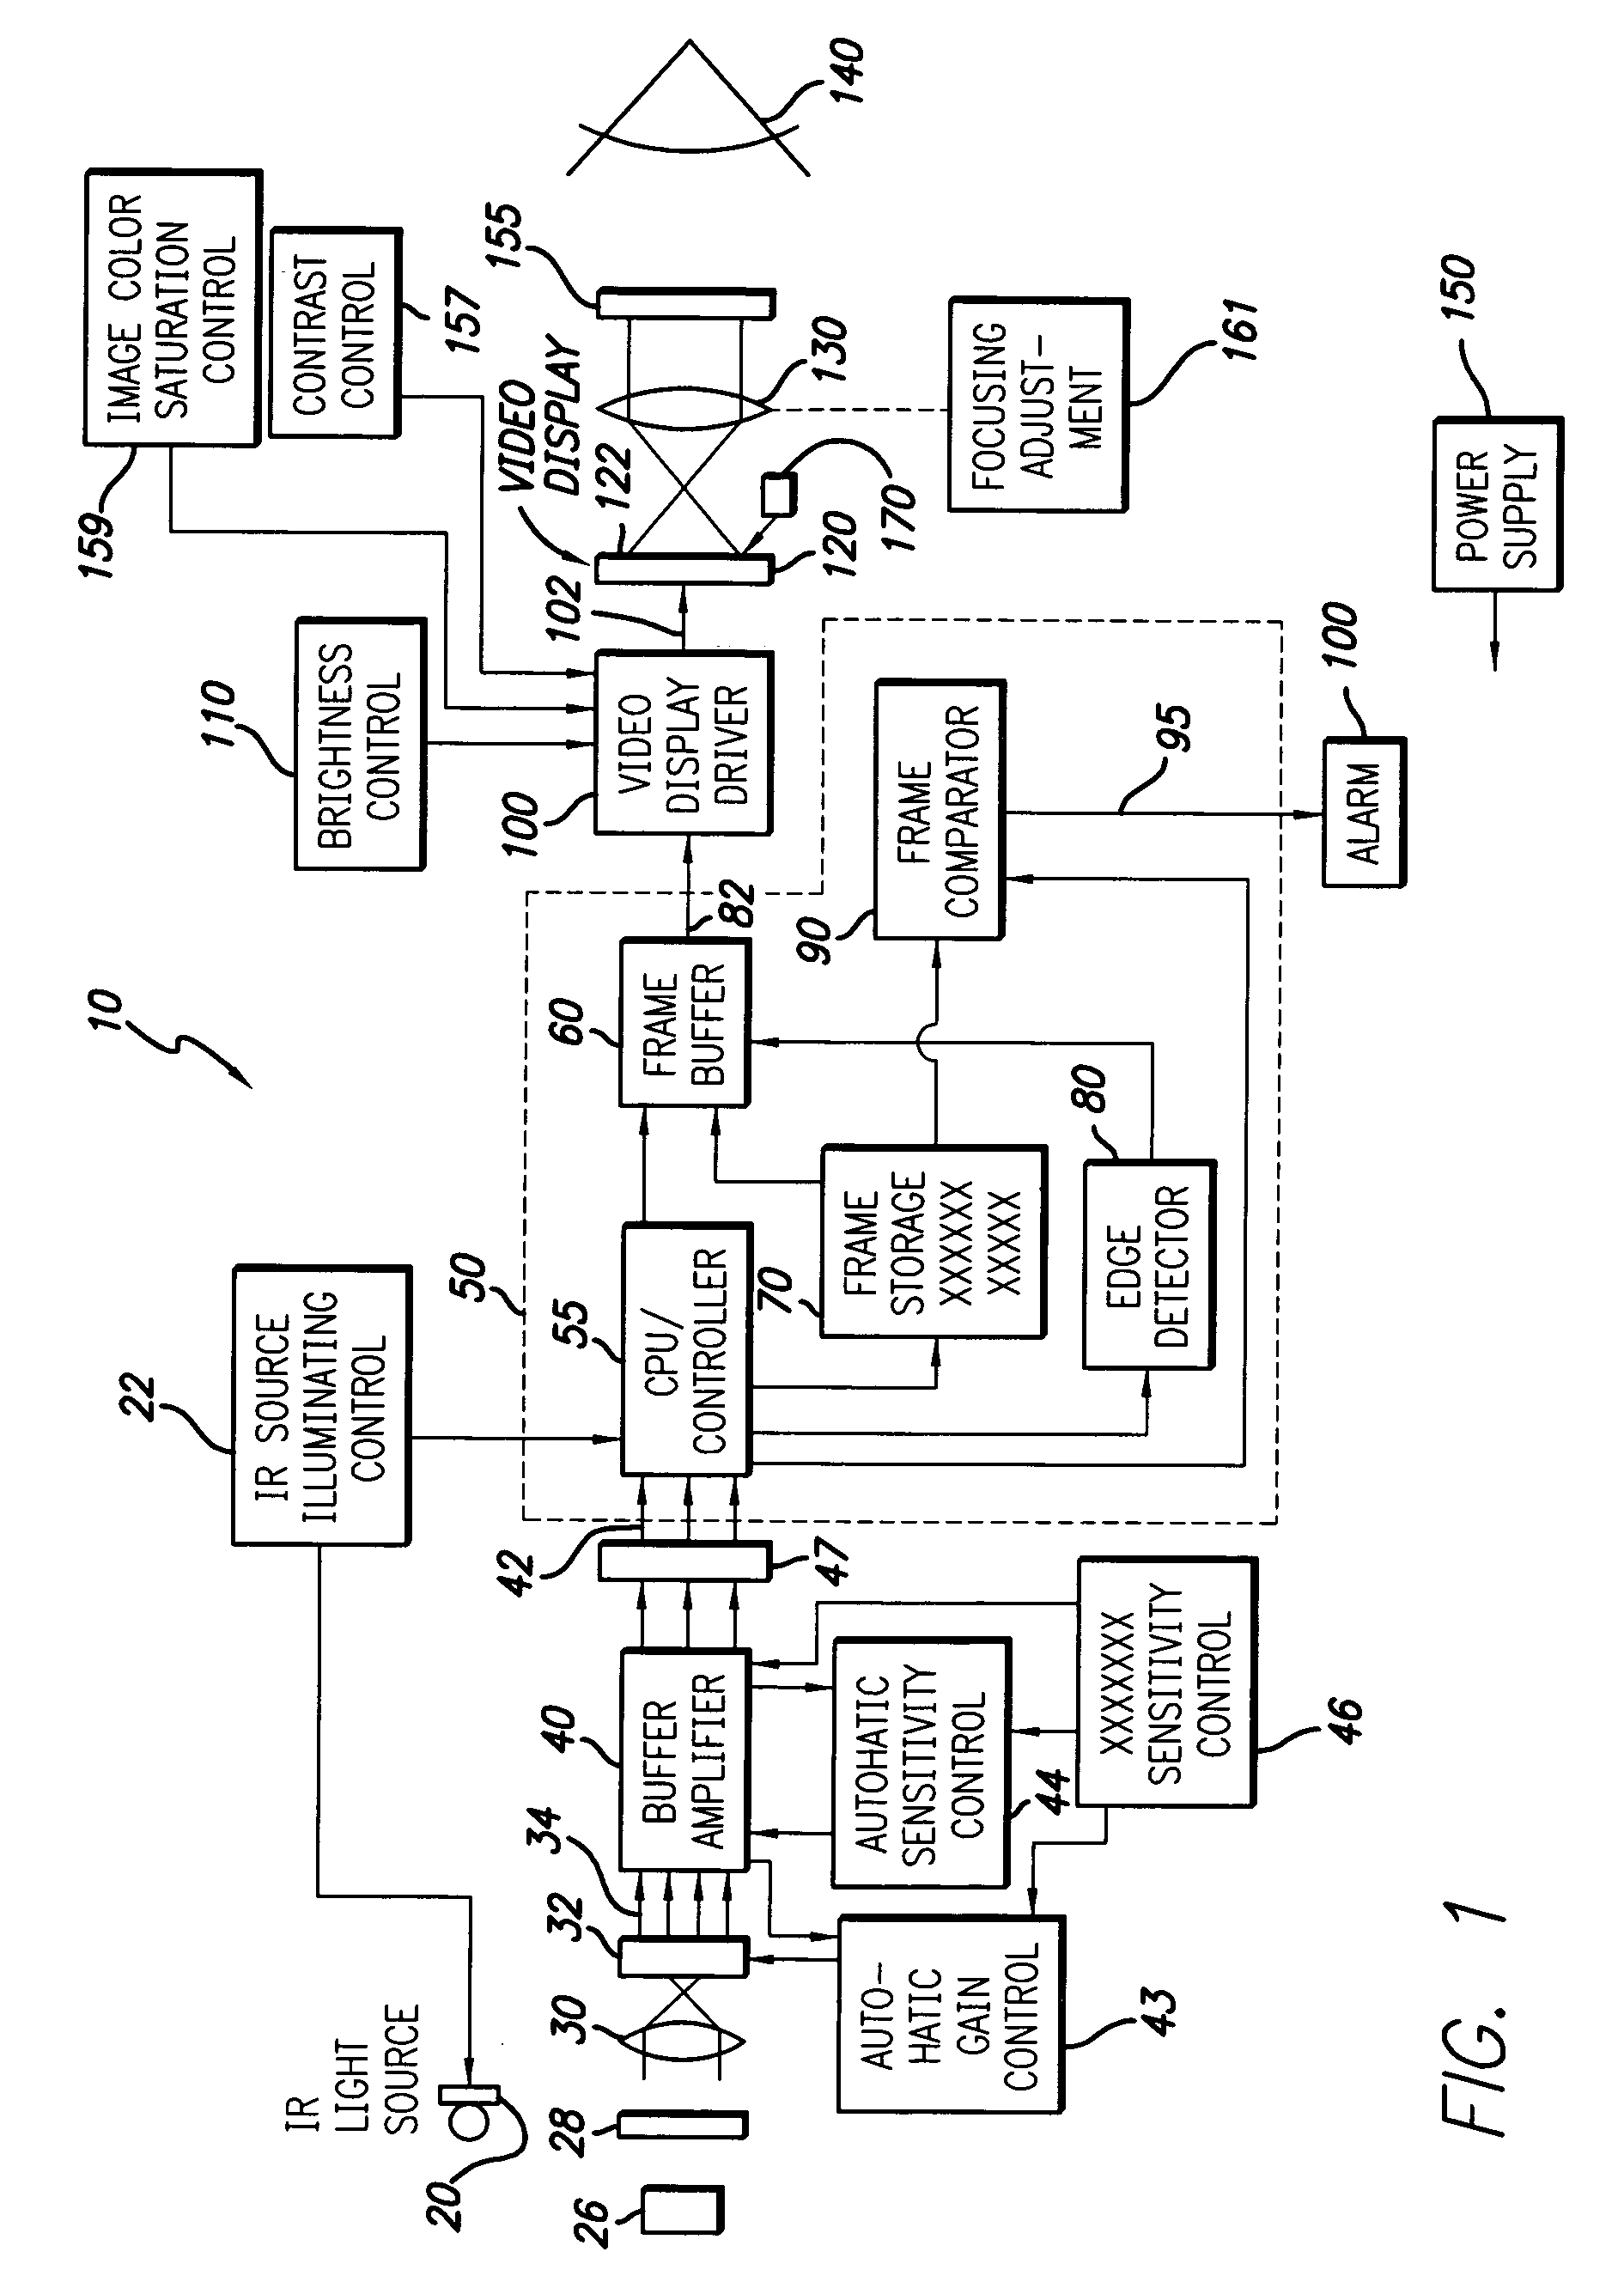 Infrared toy viewing scope and games utilizing infrared radiation